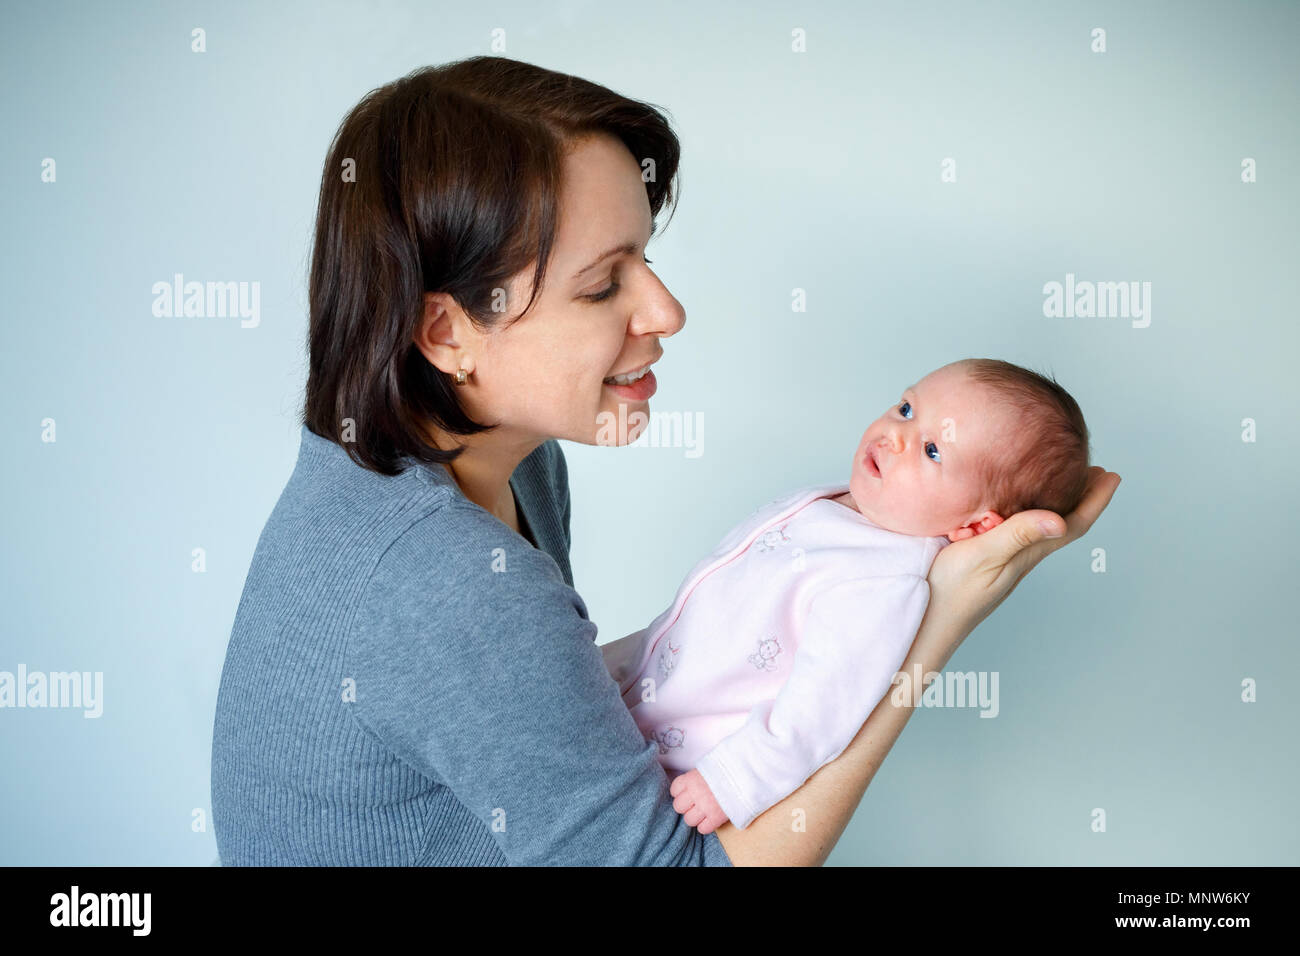 Happiness maternity concept. Mom and baby. Mothers Day Stock Photo